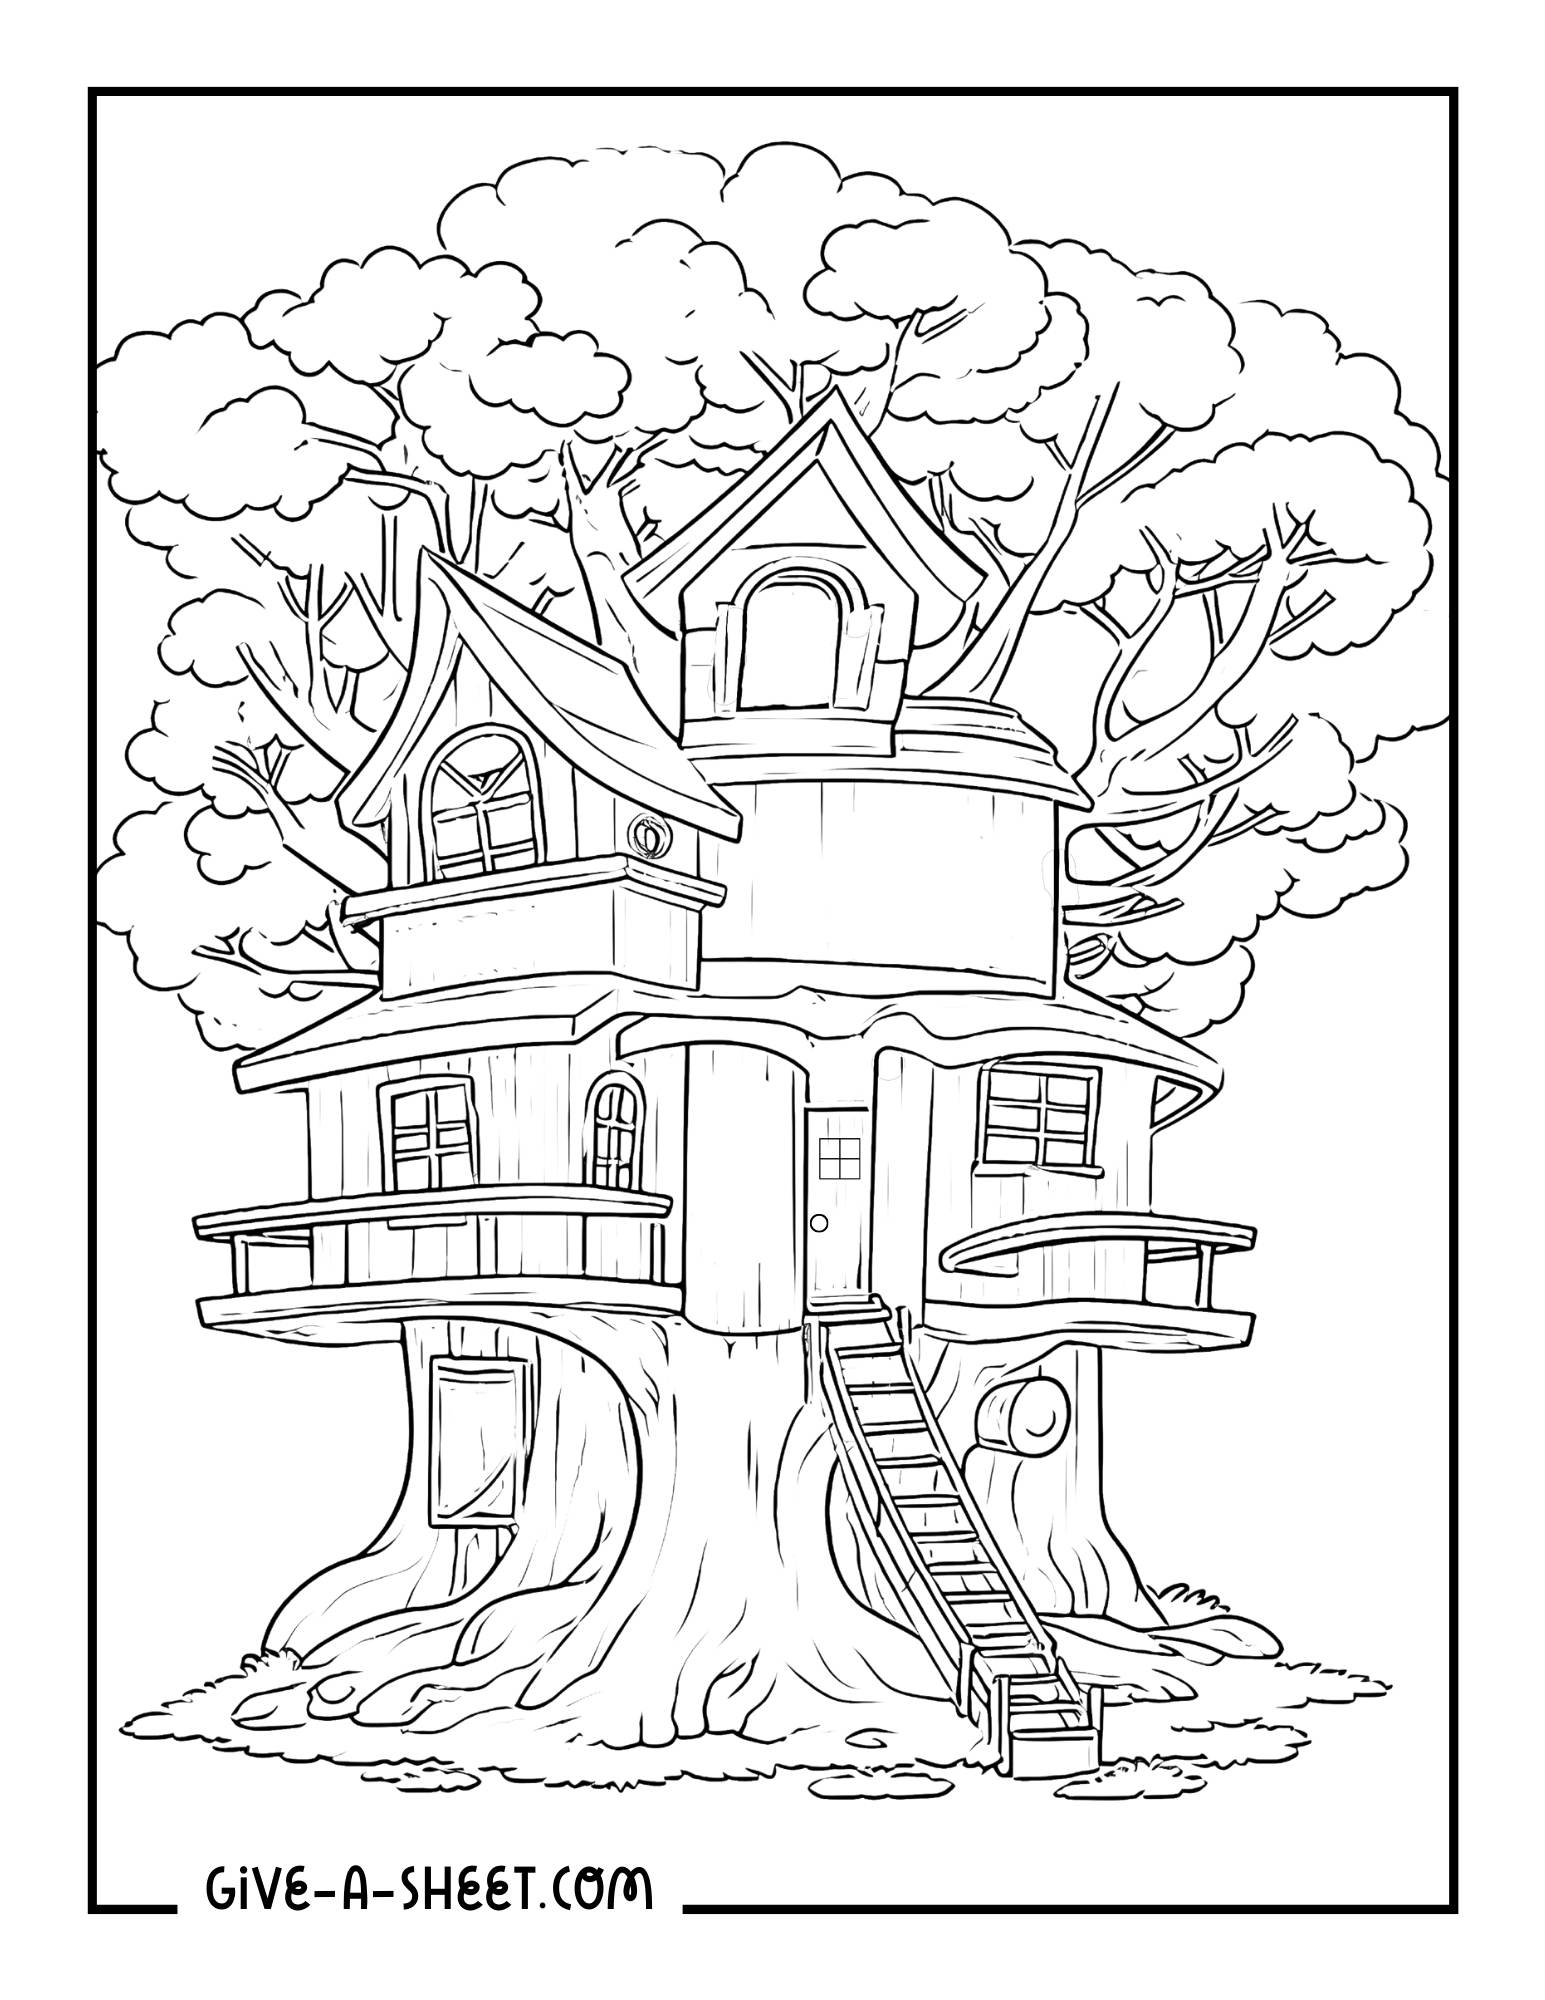 Tree house coloring page.